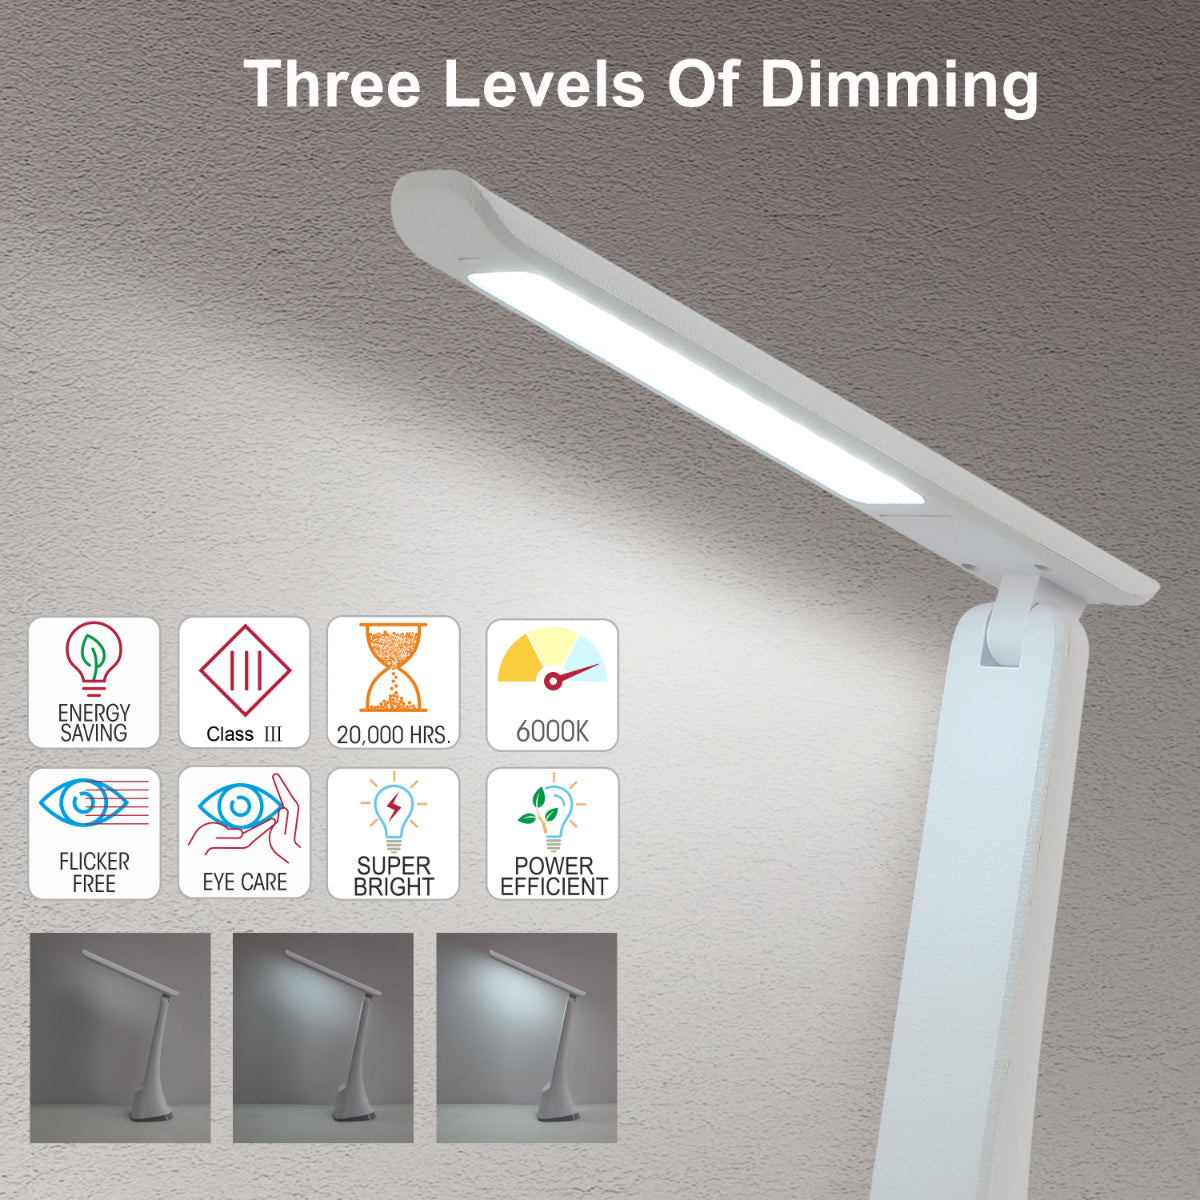 Lighting properties of Sleek Foldable LED Desk Lamp with Touch Control 130-03762